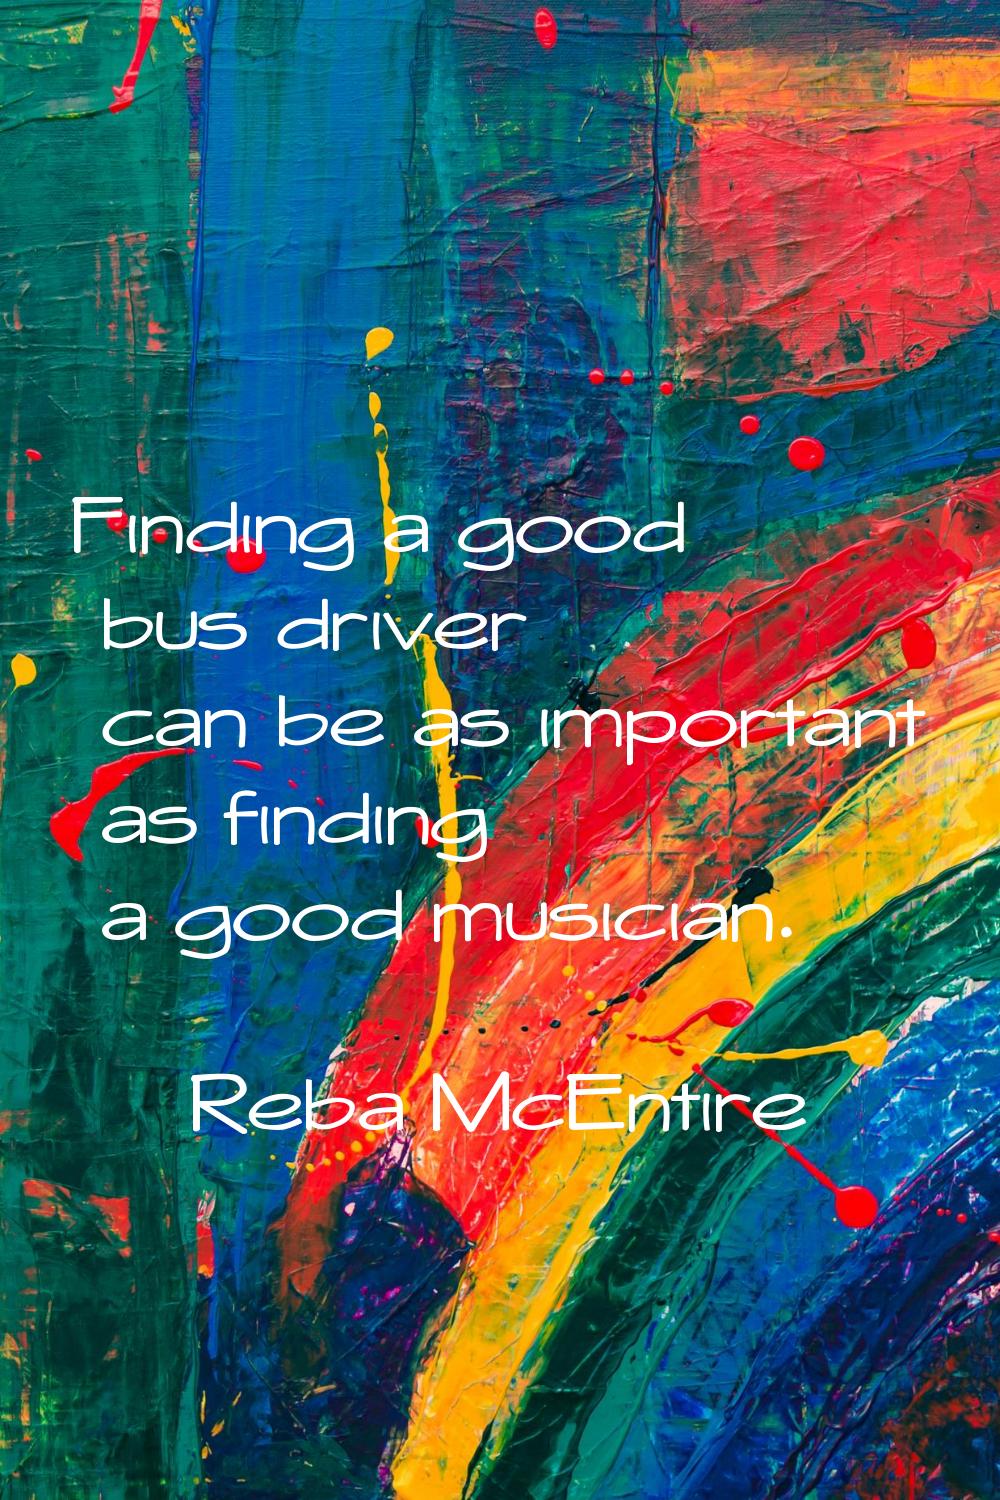 Finding a good bus driver can be as important as finding a good musician.